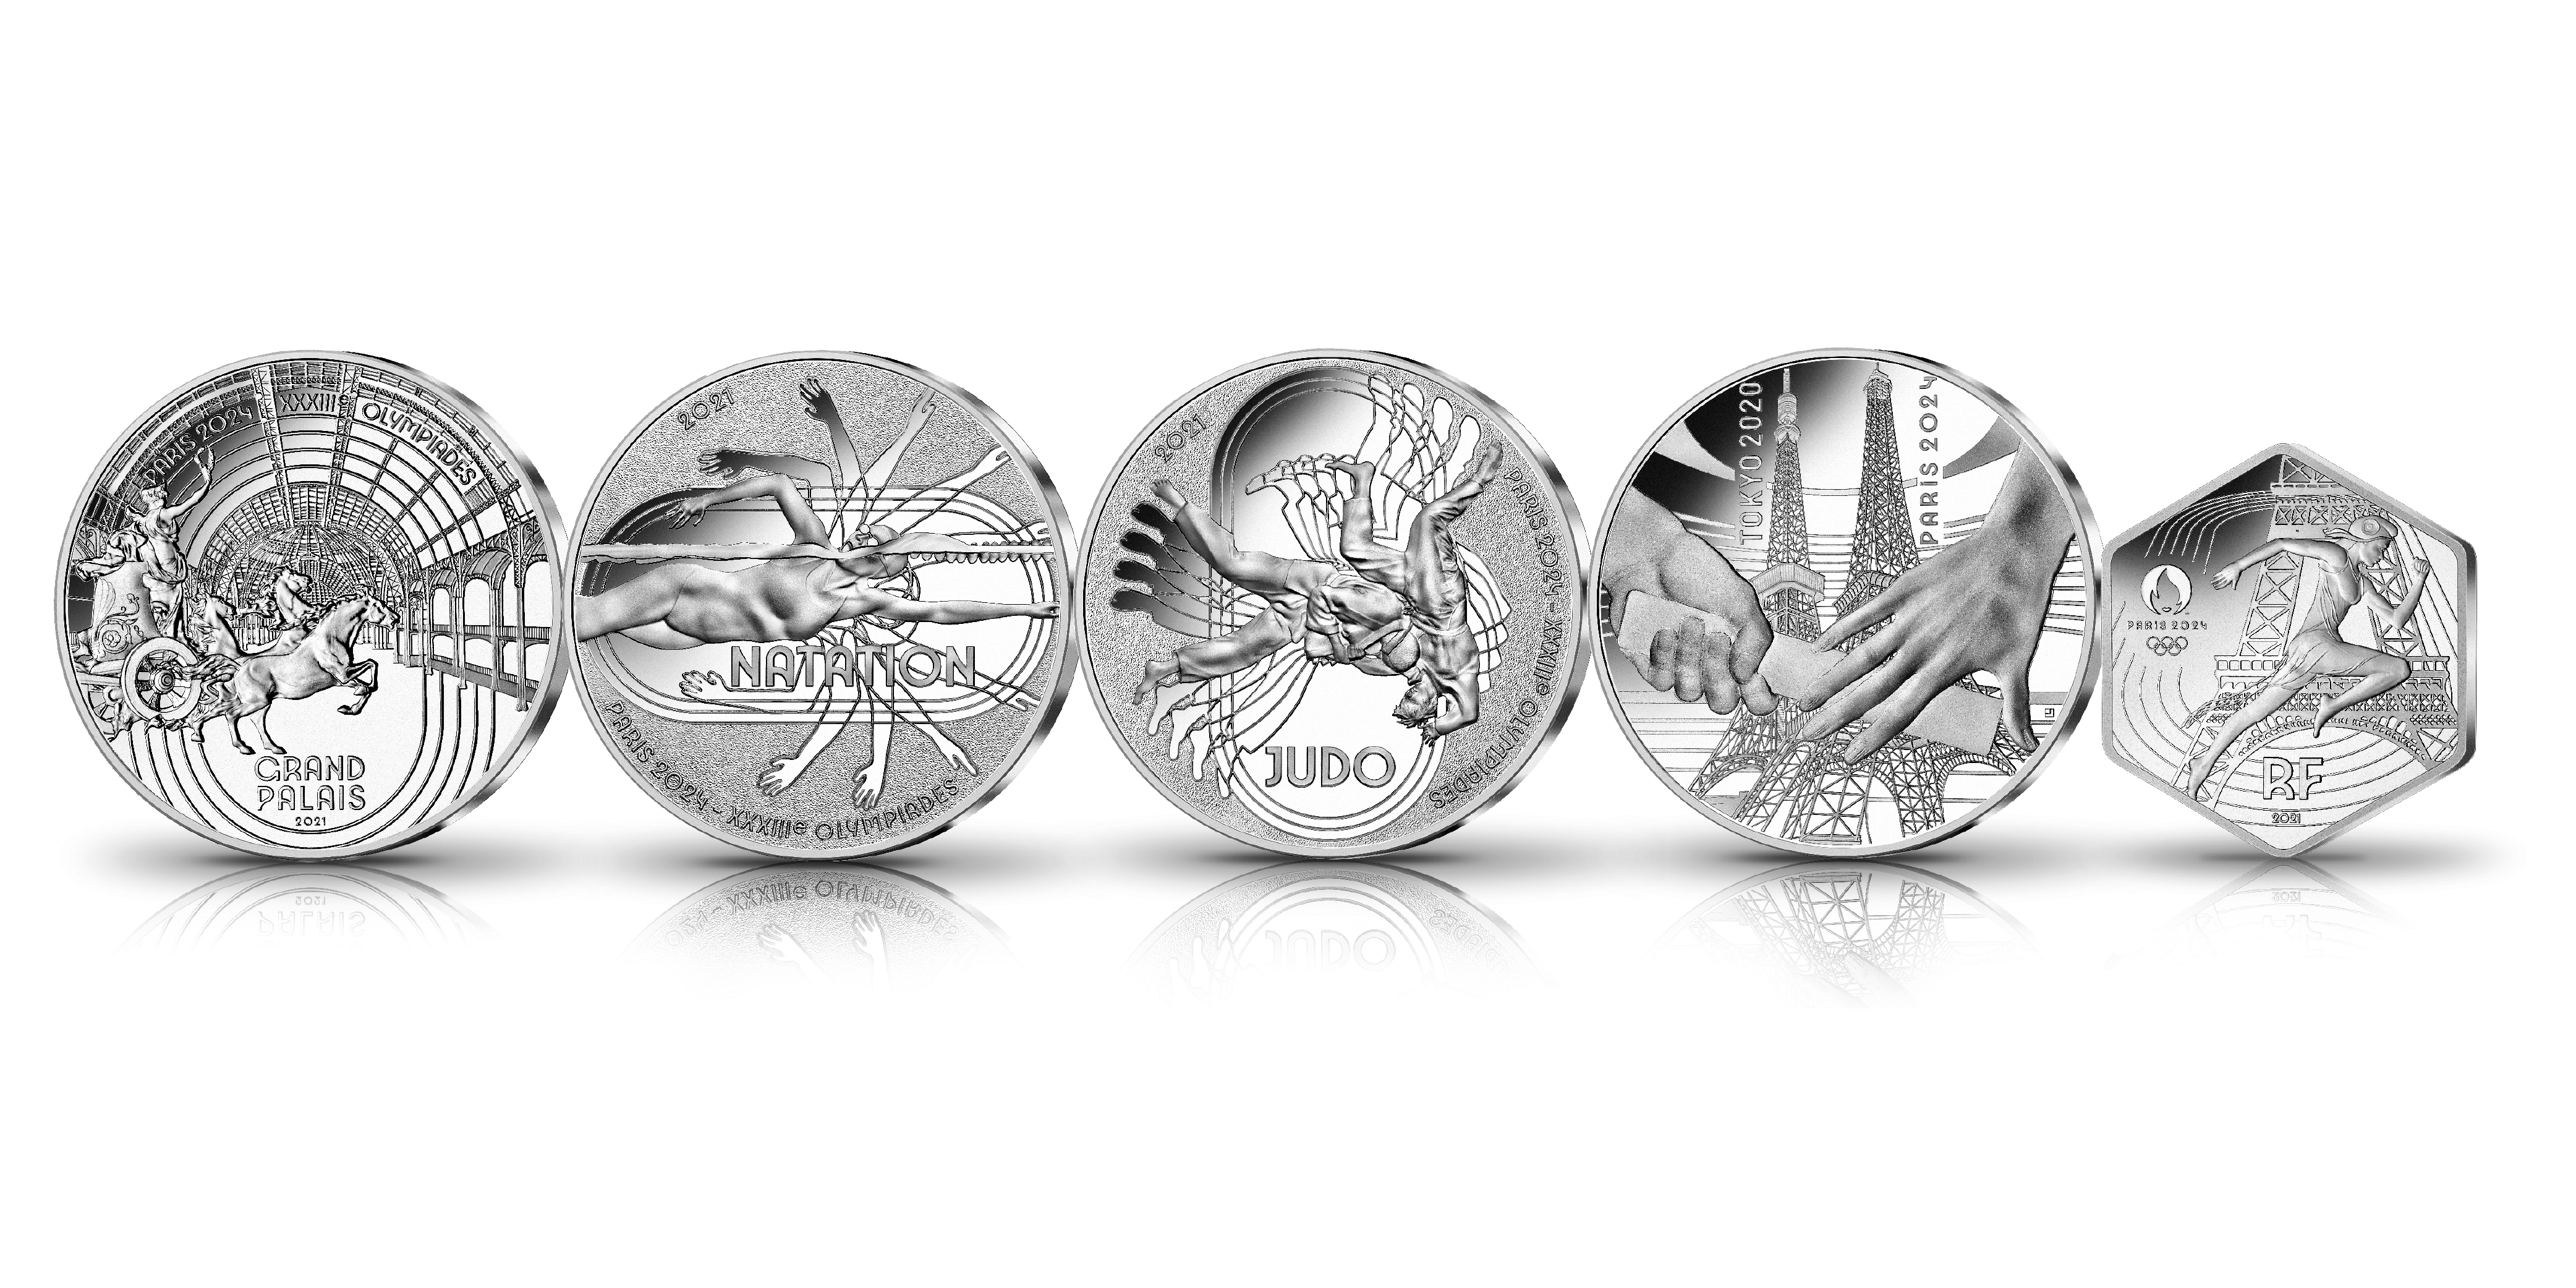 The Paris 2024 The Official Courntdown Silver Coin Set Limited First Strike Edition